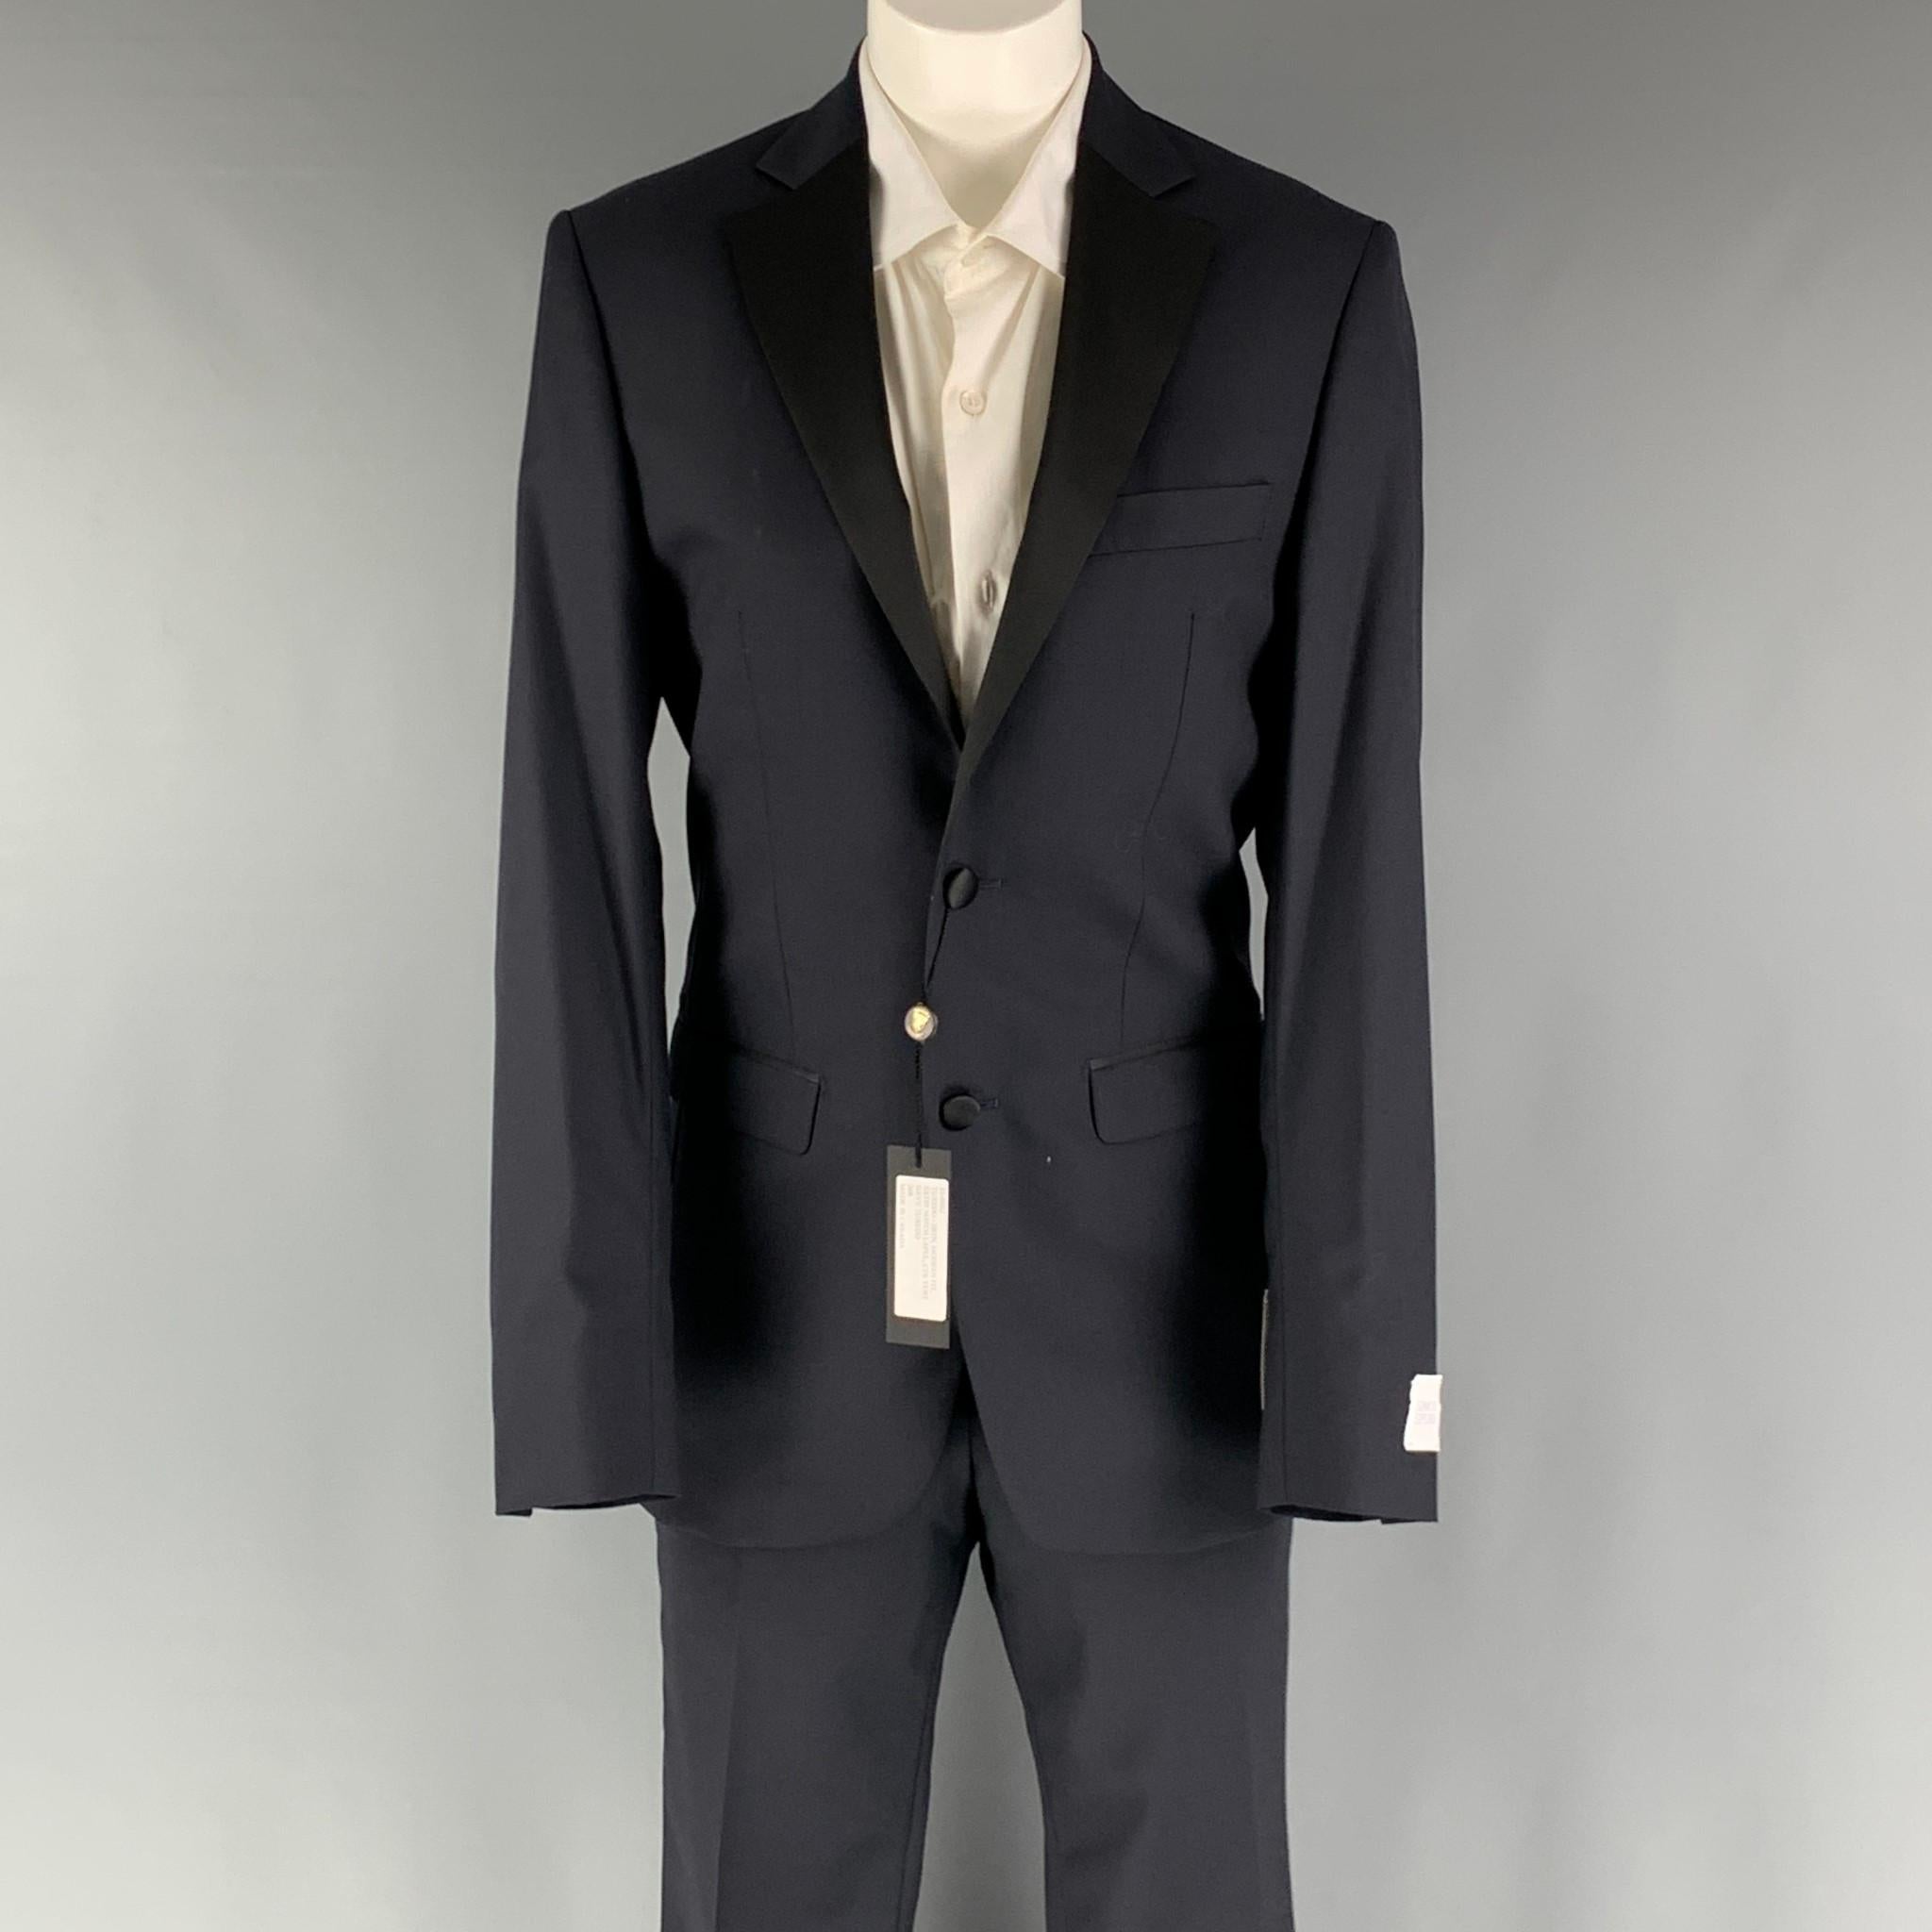 SIMON SPURR 'VALDEX' tuxedo comes in a black woven material with a full liner and includes a single breasted, double button tuxedo style with a notch lapel and matching flat front trousers.

New with Tags.
Marked: 36 R